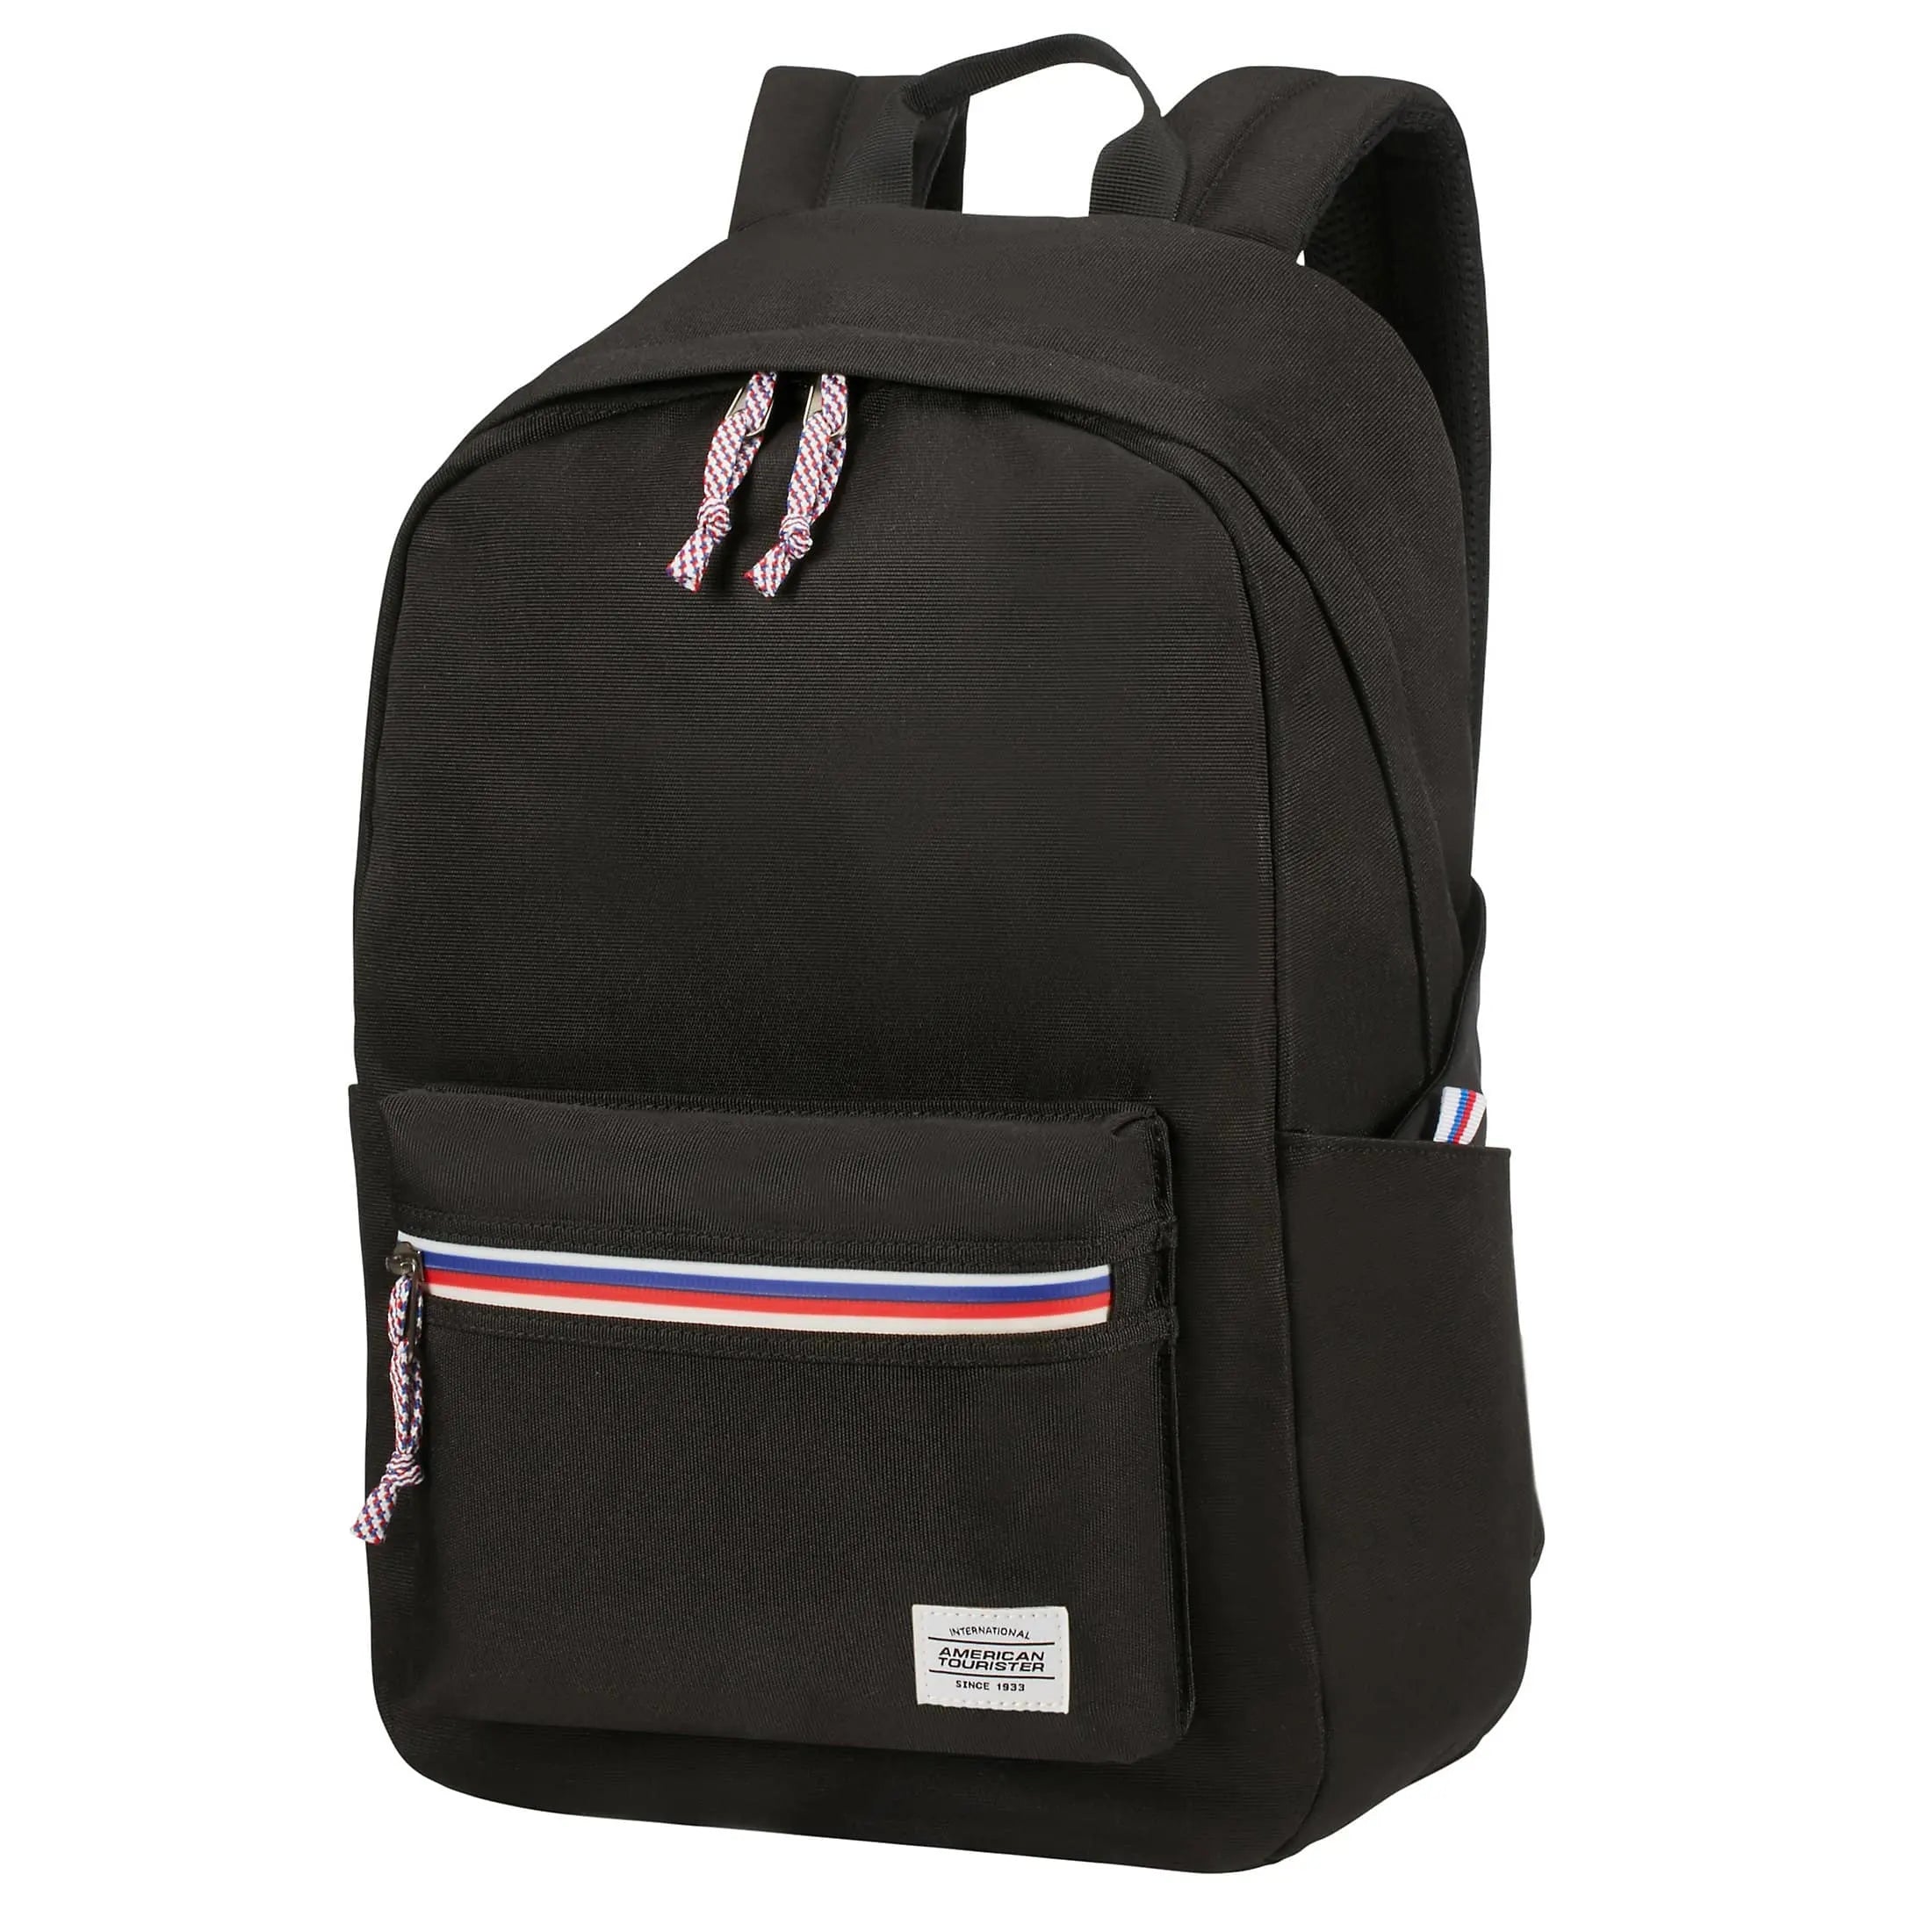 American Tourister Upbeat leisure backpack 42 cm - black